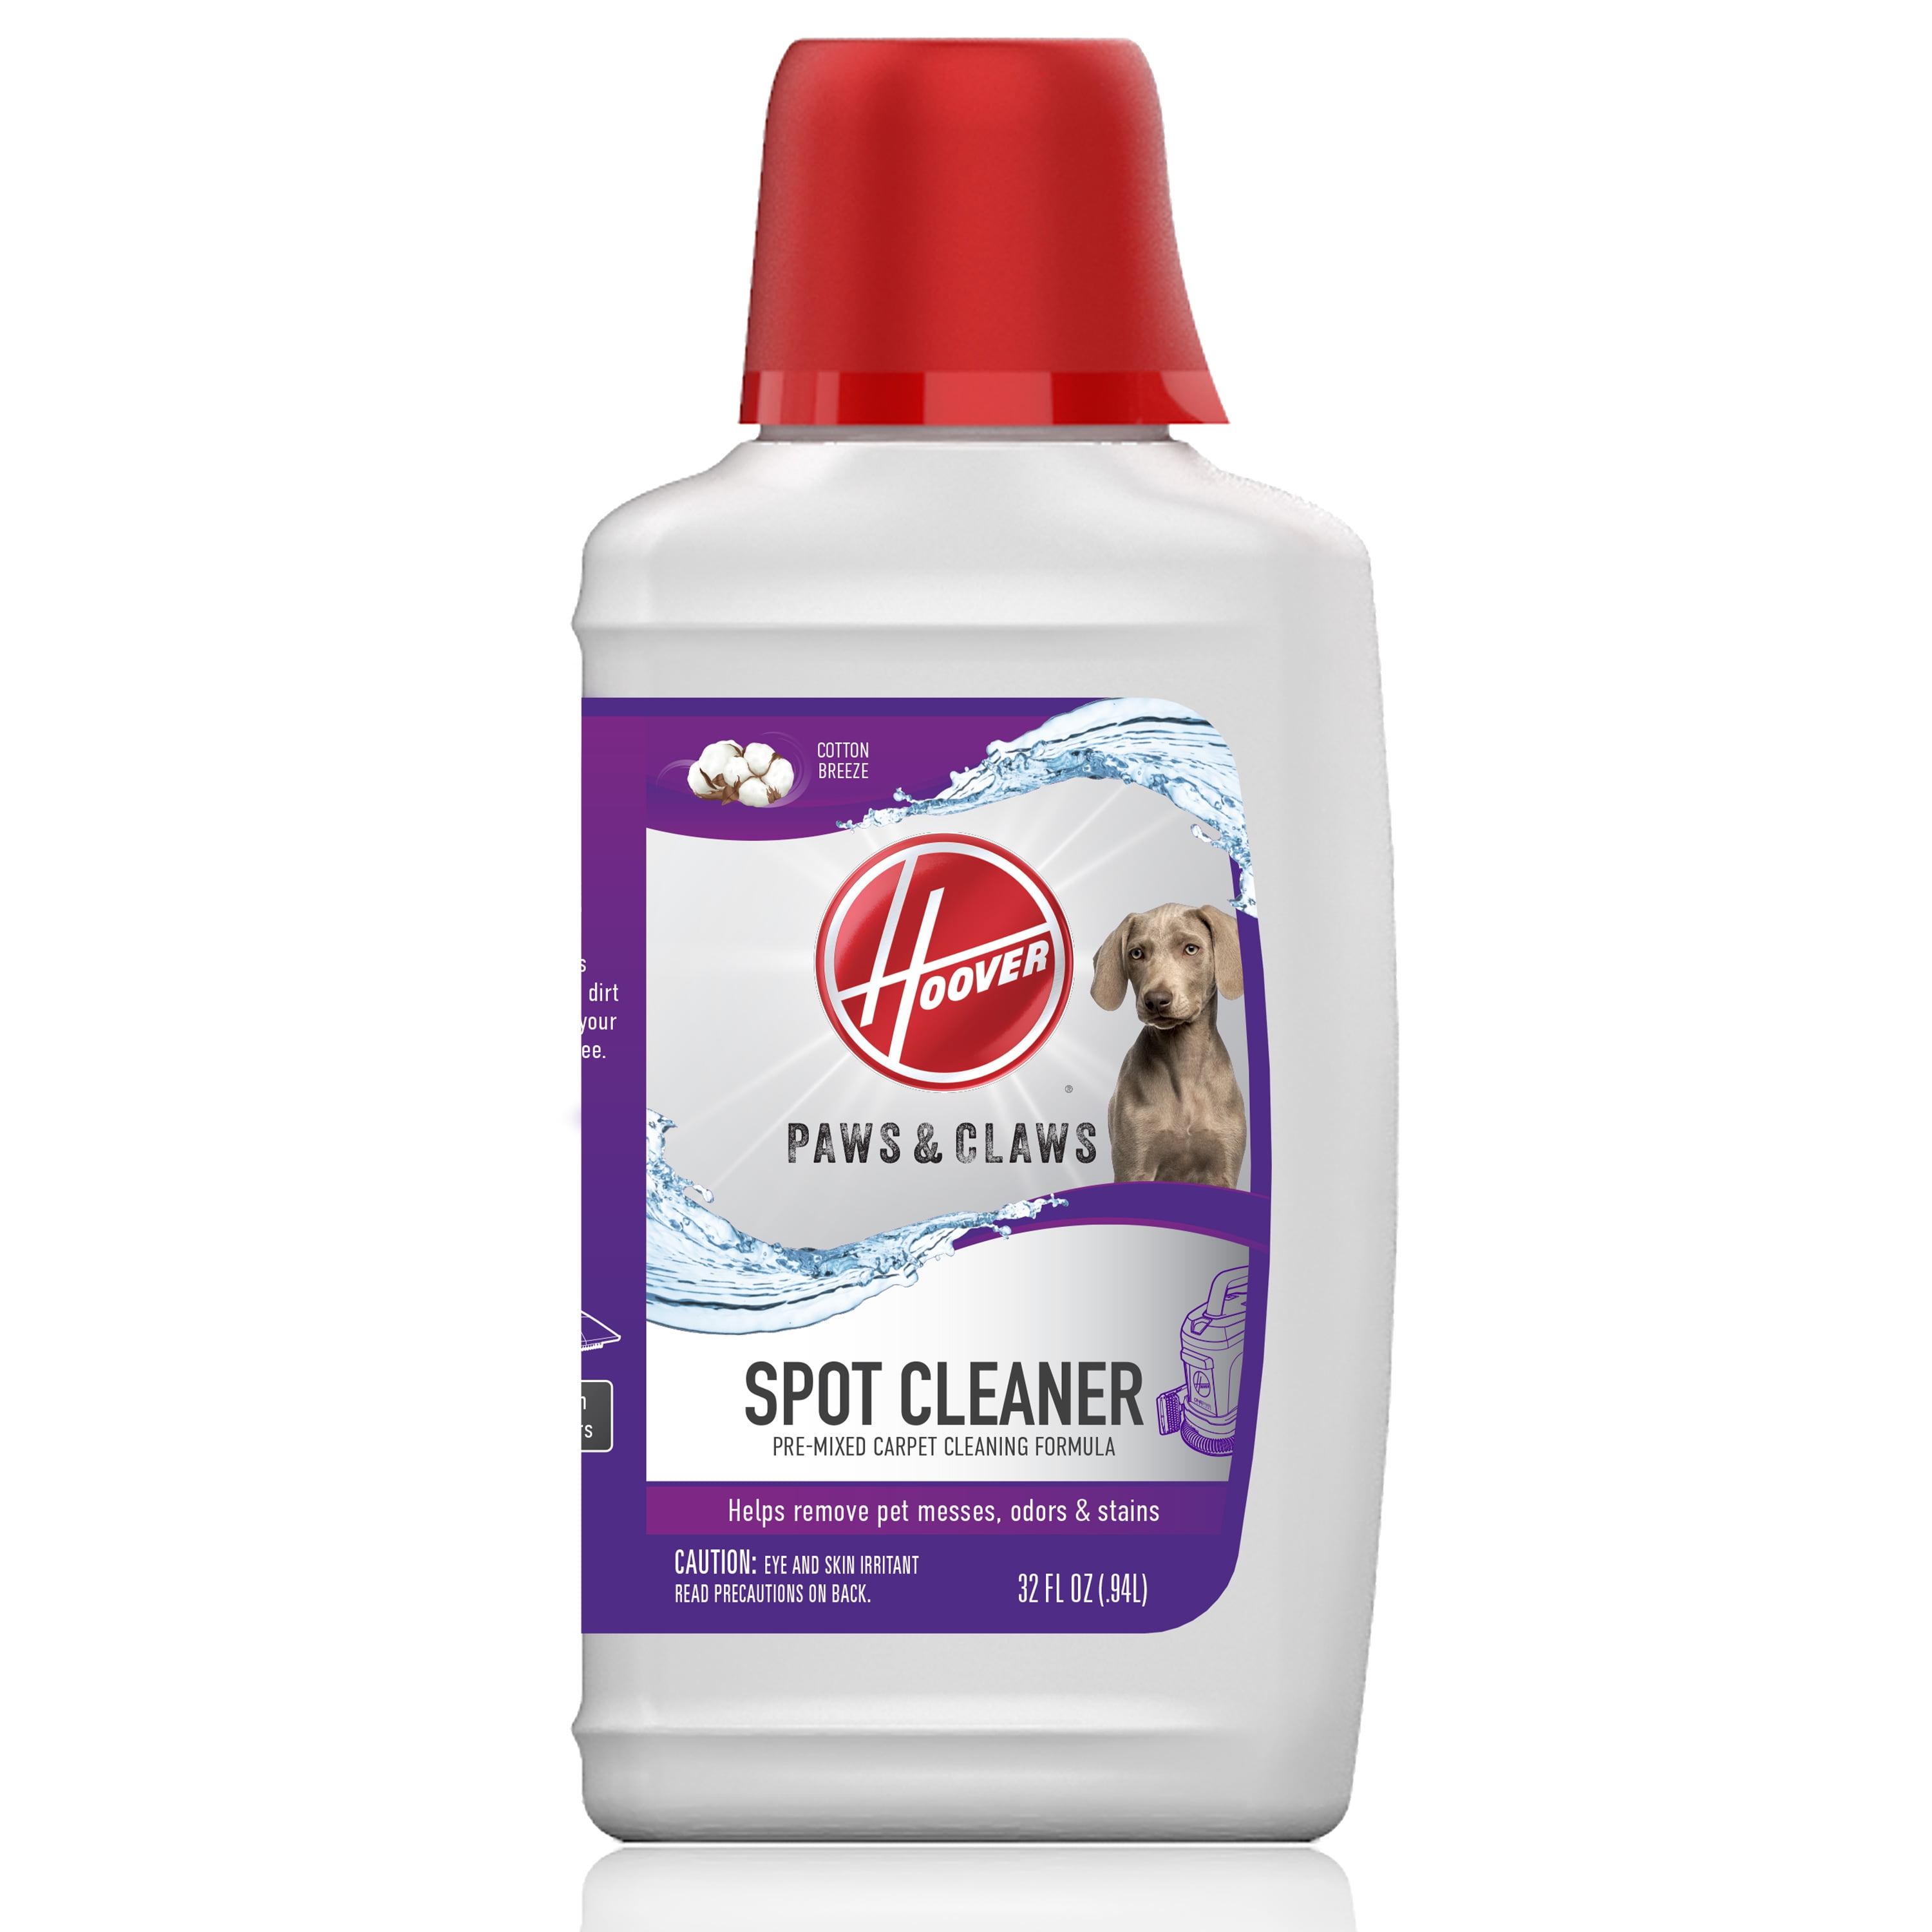 Hoover Paws & Claws Portable Pet Stain Odor Remover 32 oz, AH30940